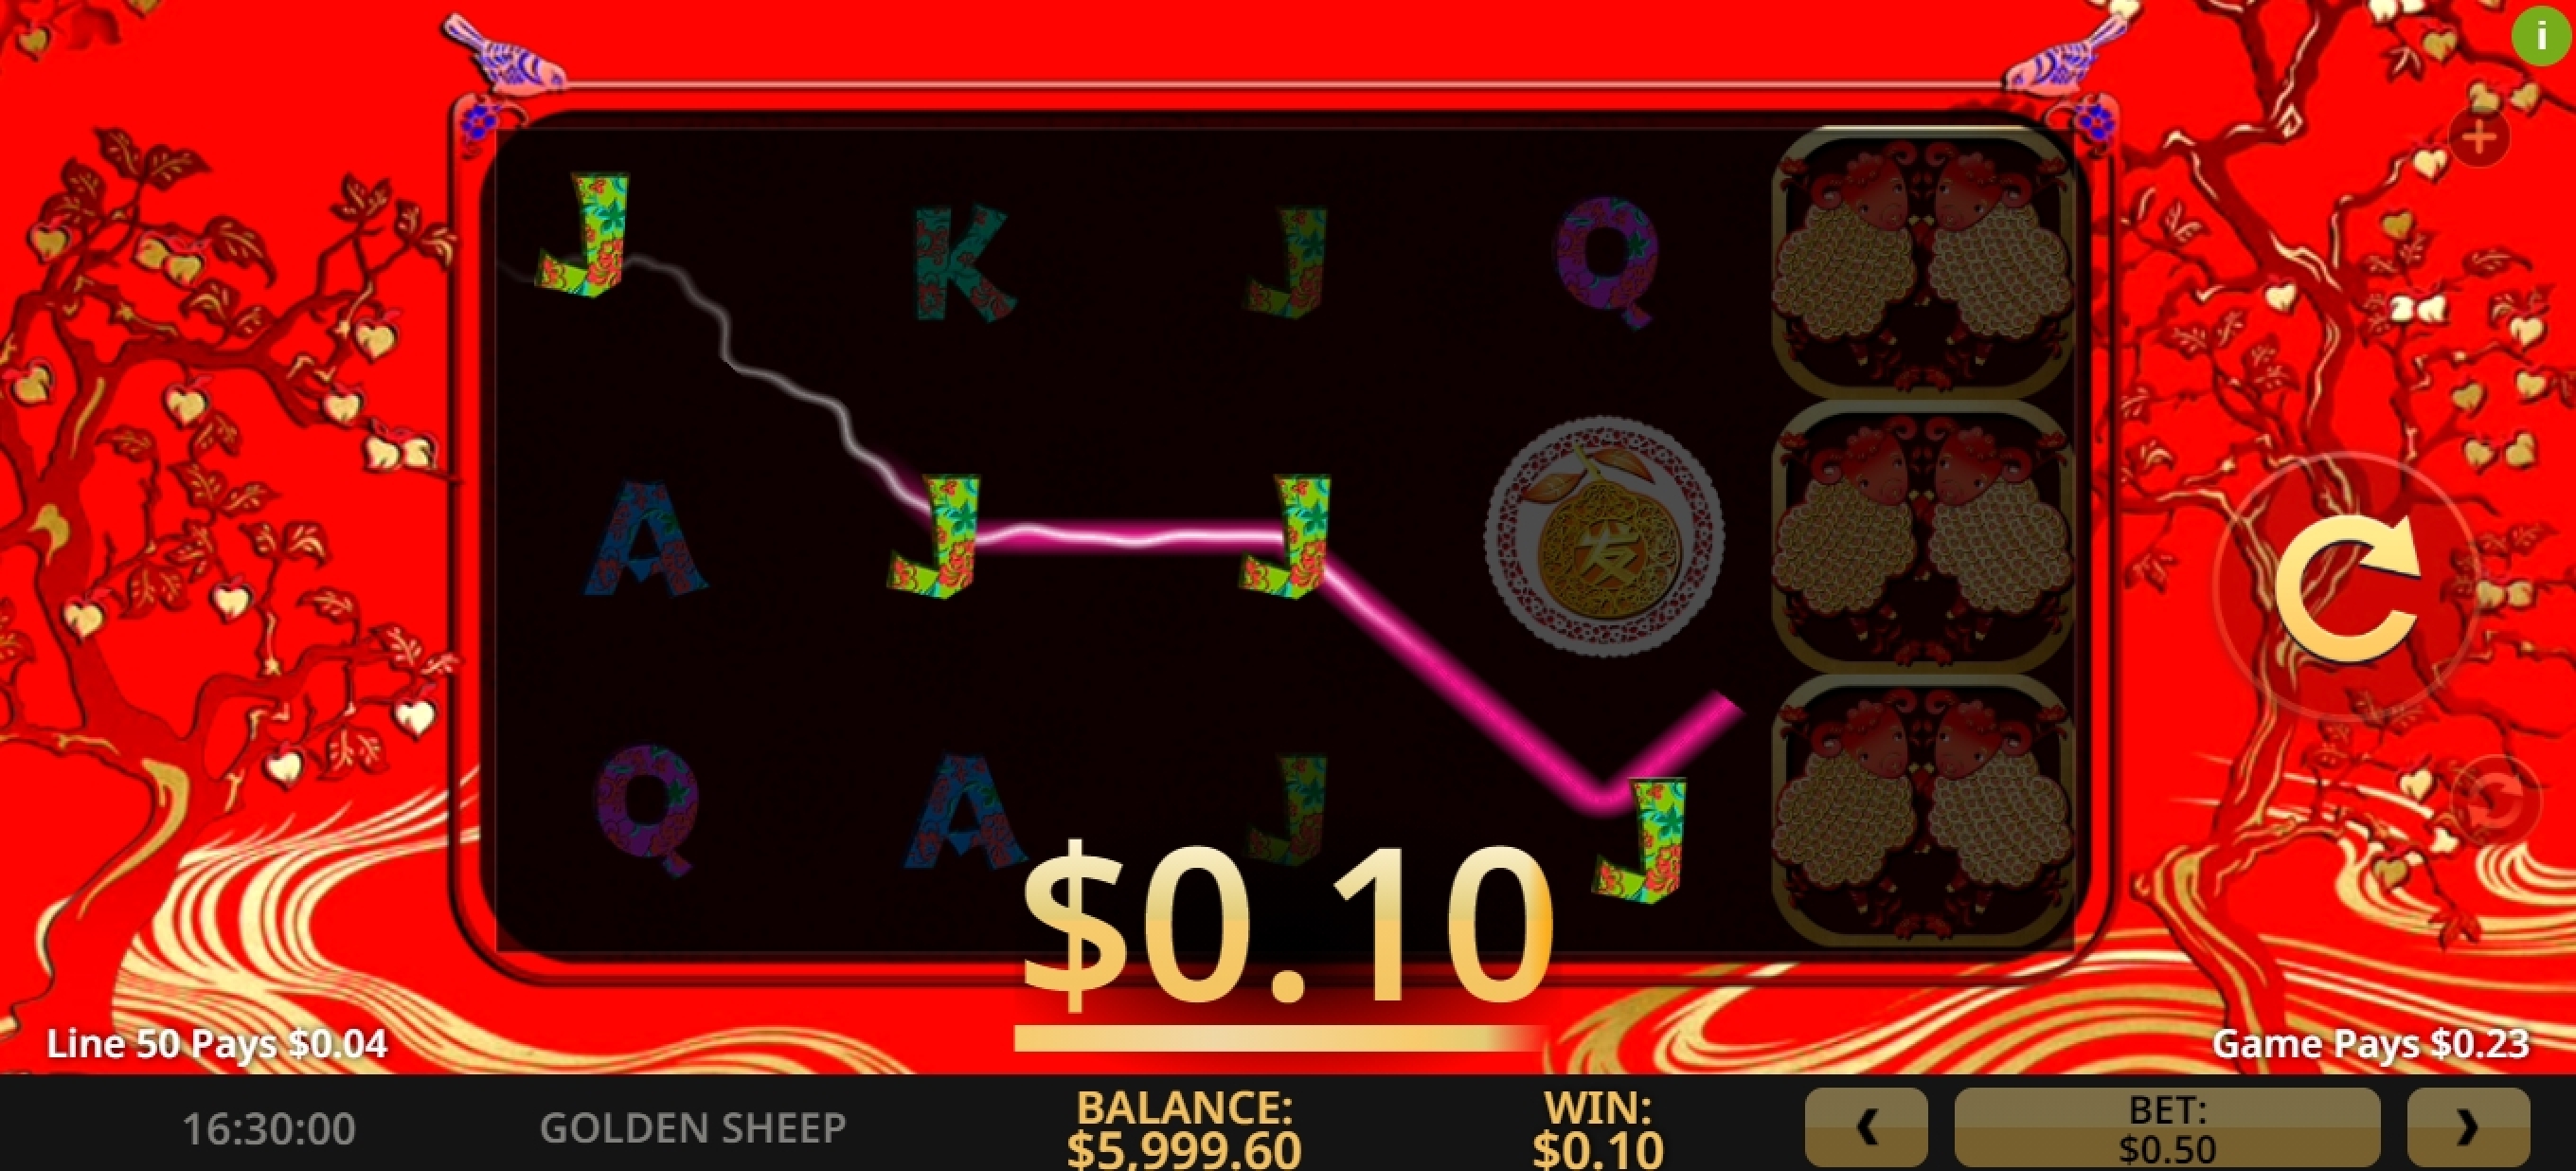 Win Money in Golden Sheep Free Slot Game by High 5 Games